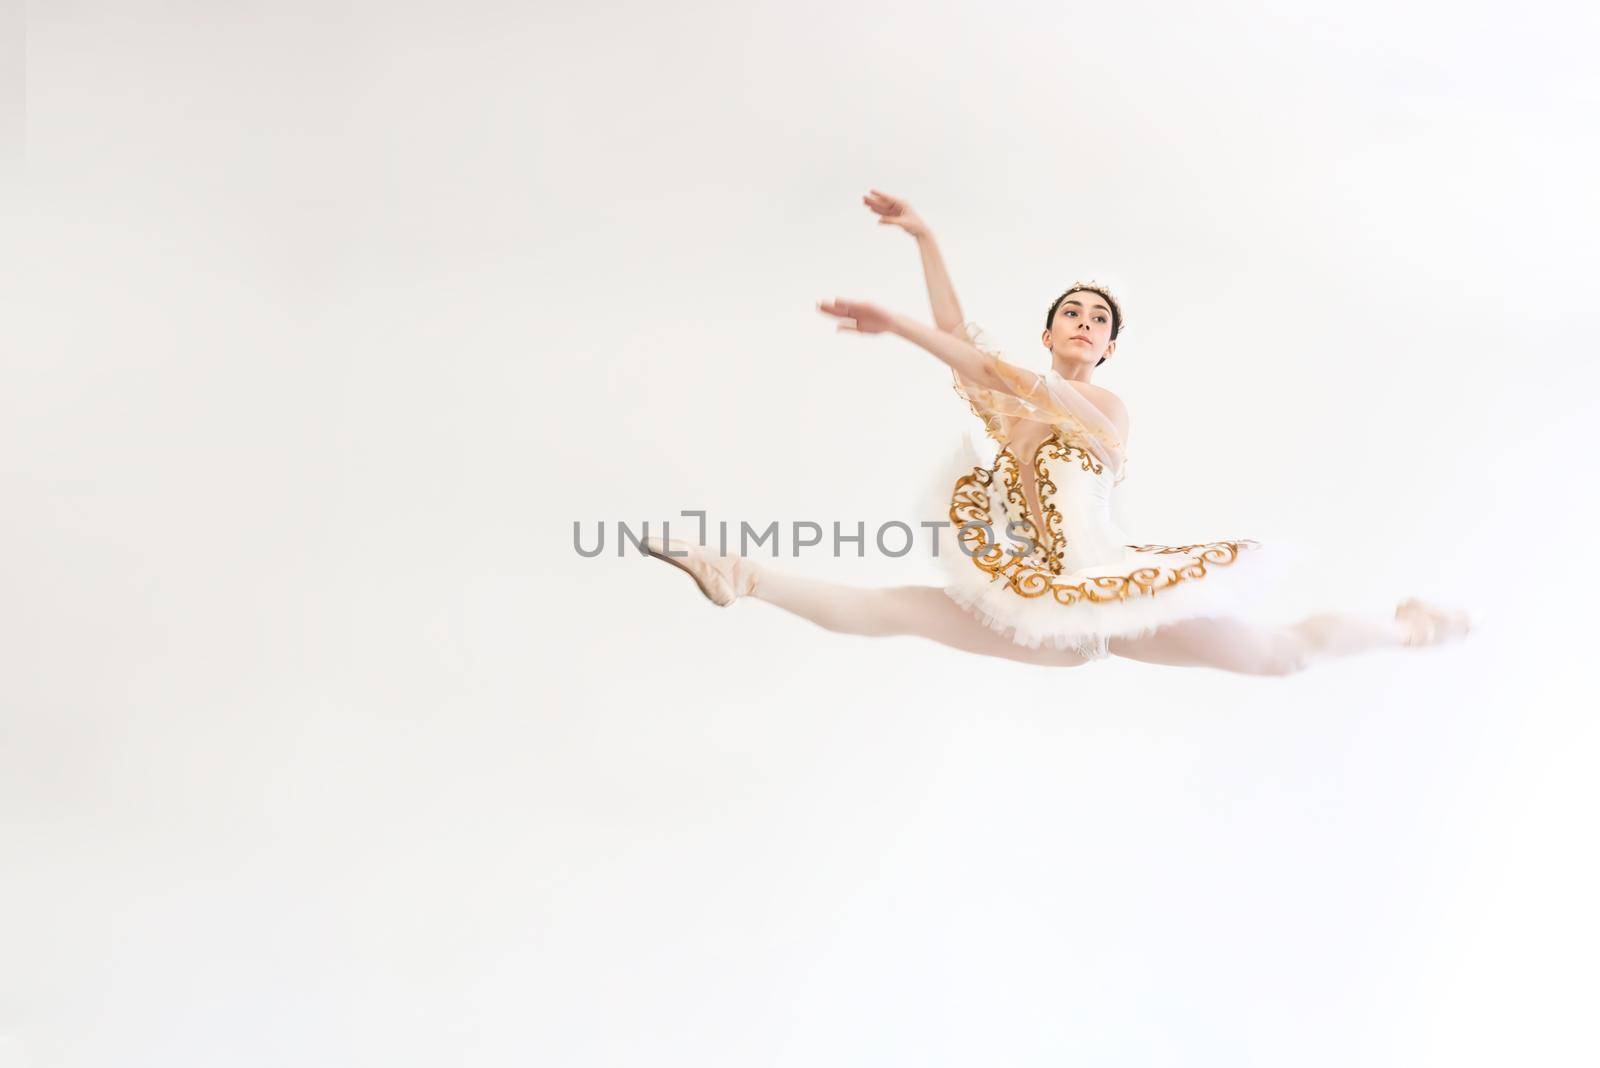 A young charming ballerina does ballet exercises in a jump against a white background